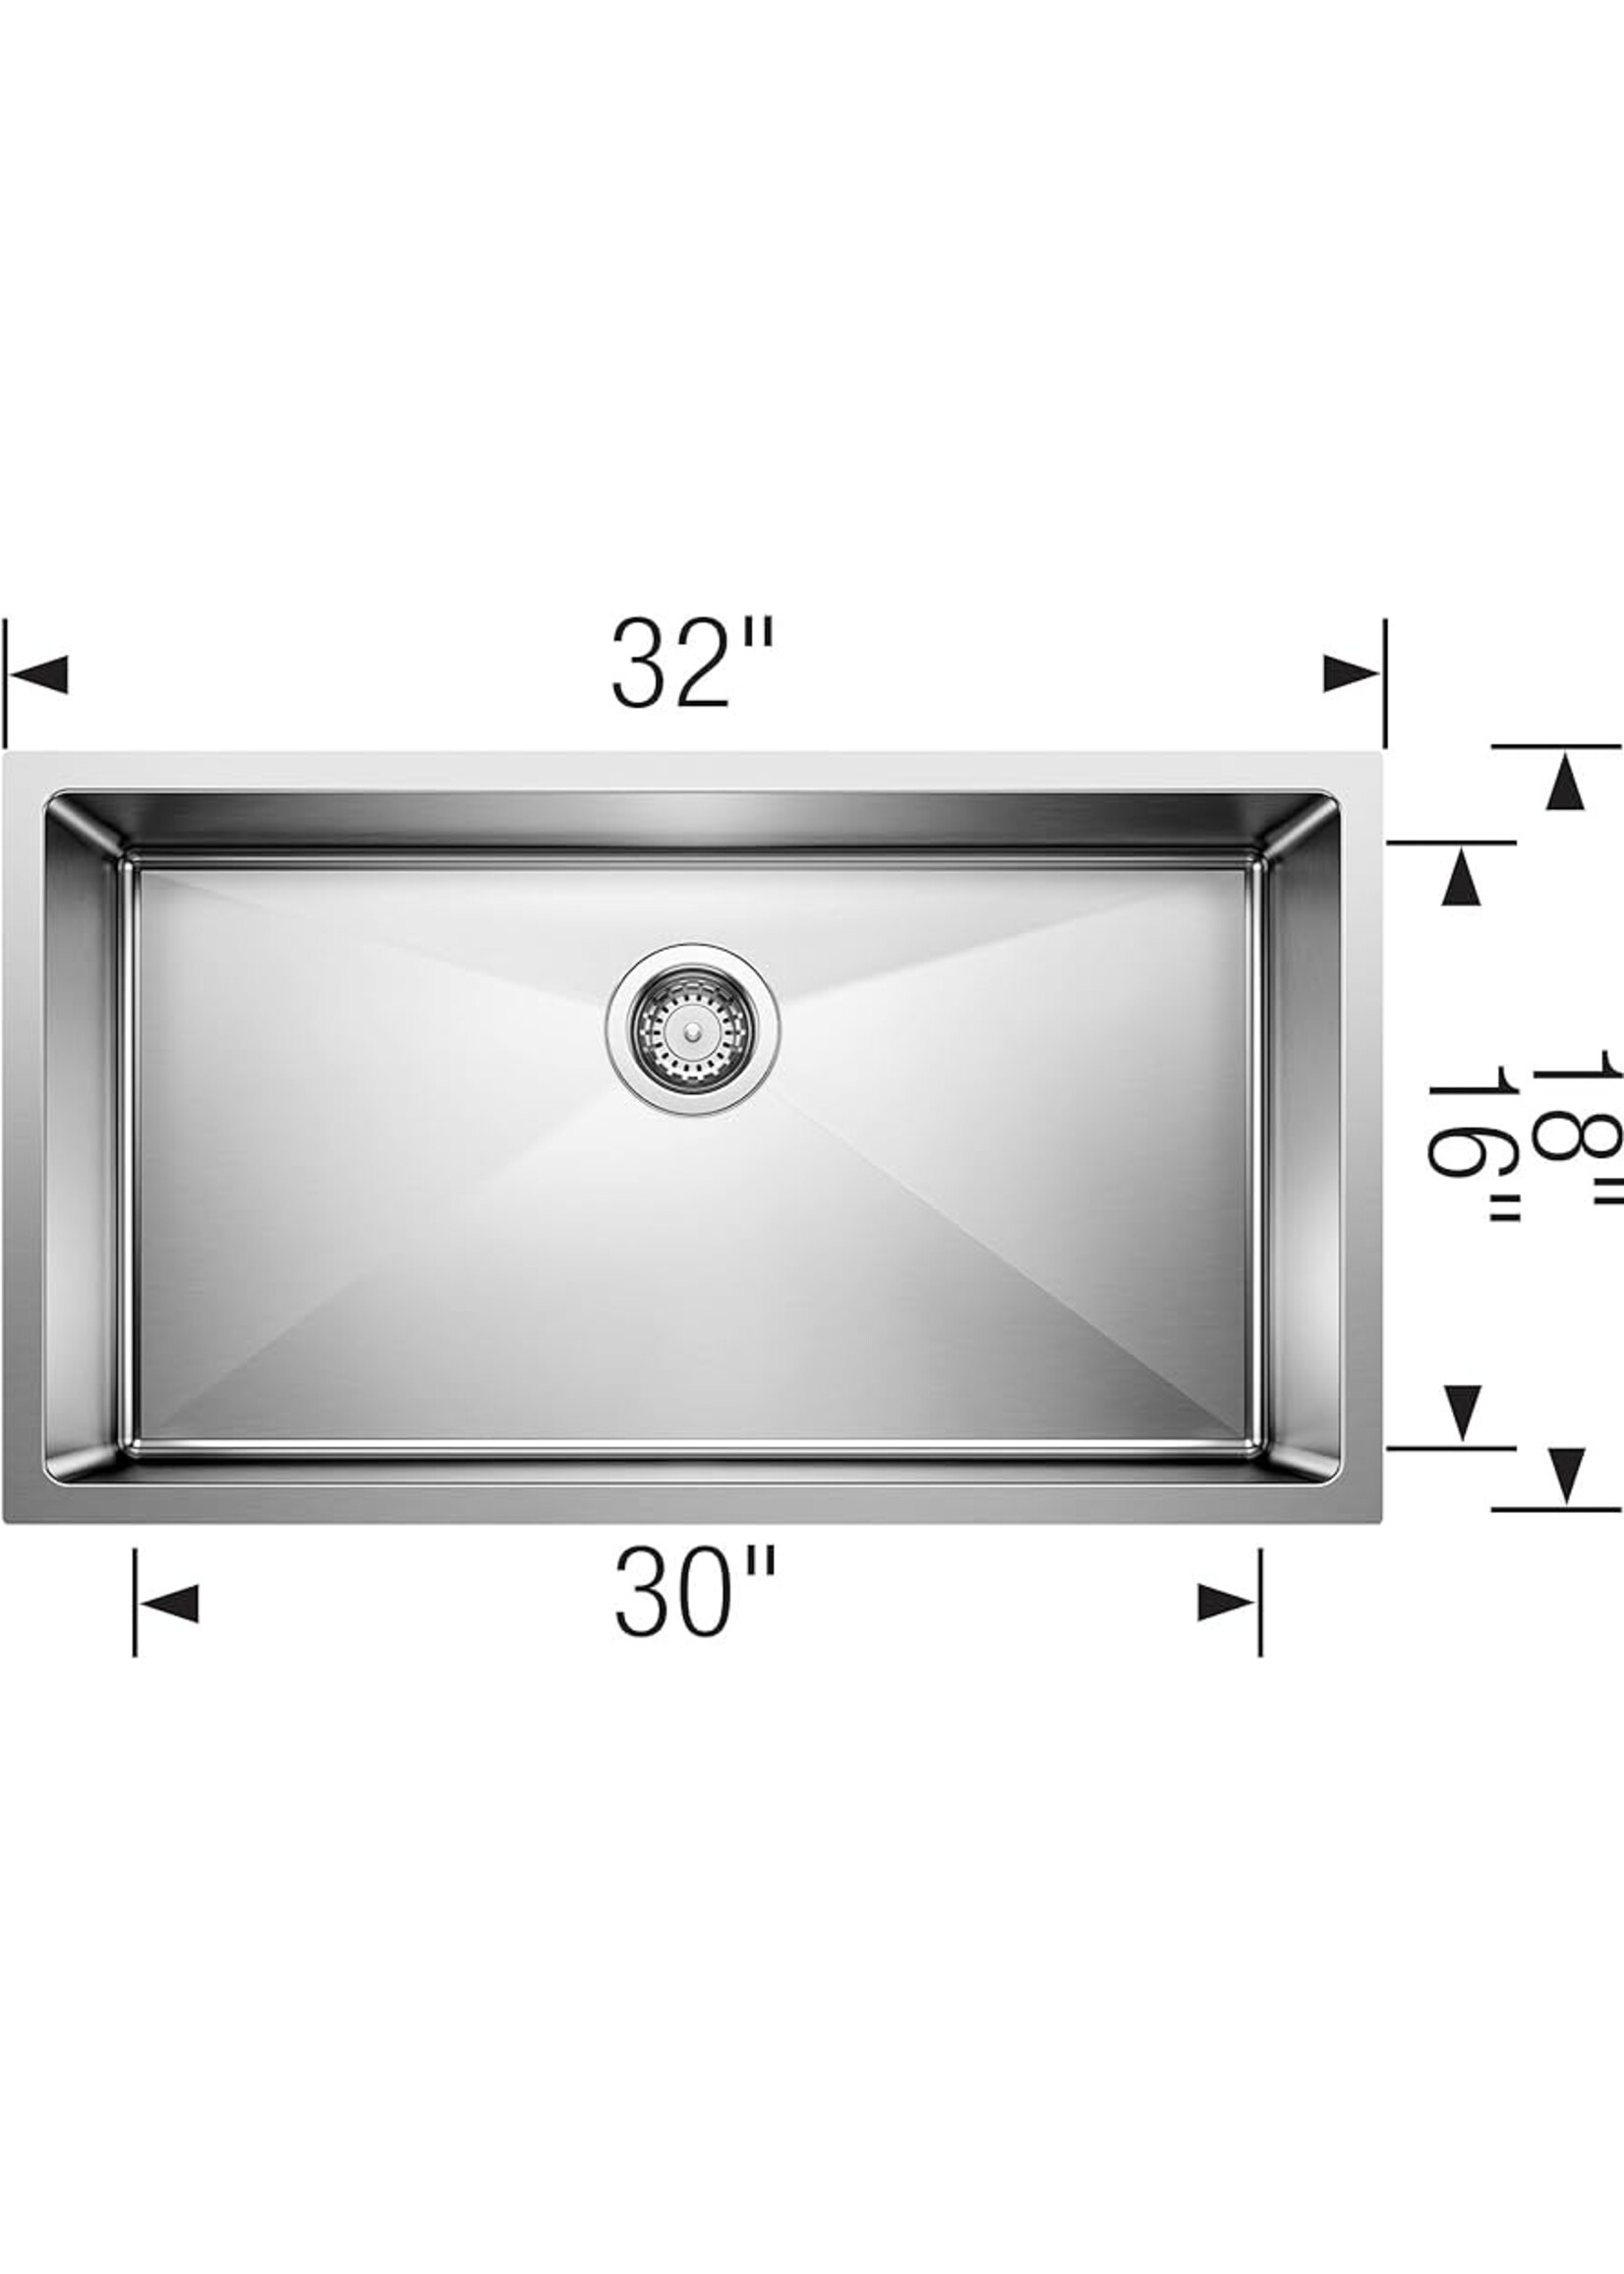 Blanco Blanco Quantrus R15 series 18 gauge stainless steel sink over all 32x18 bowl